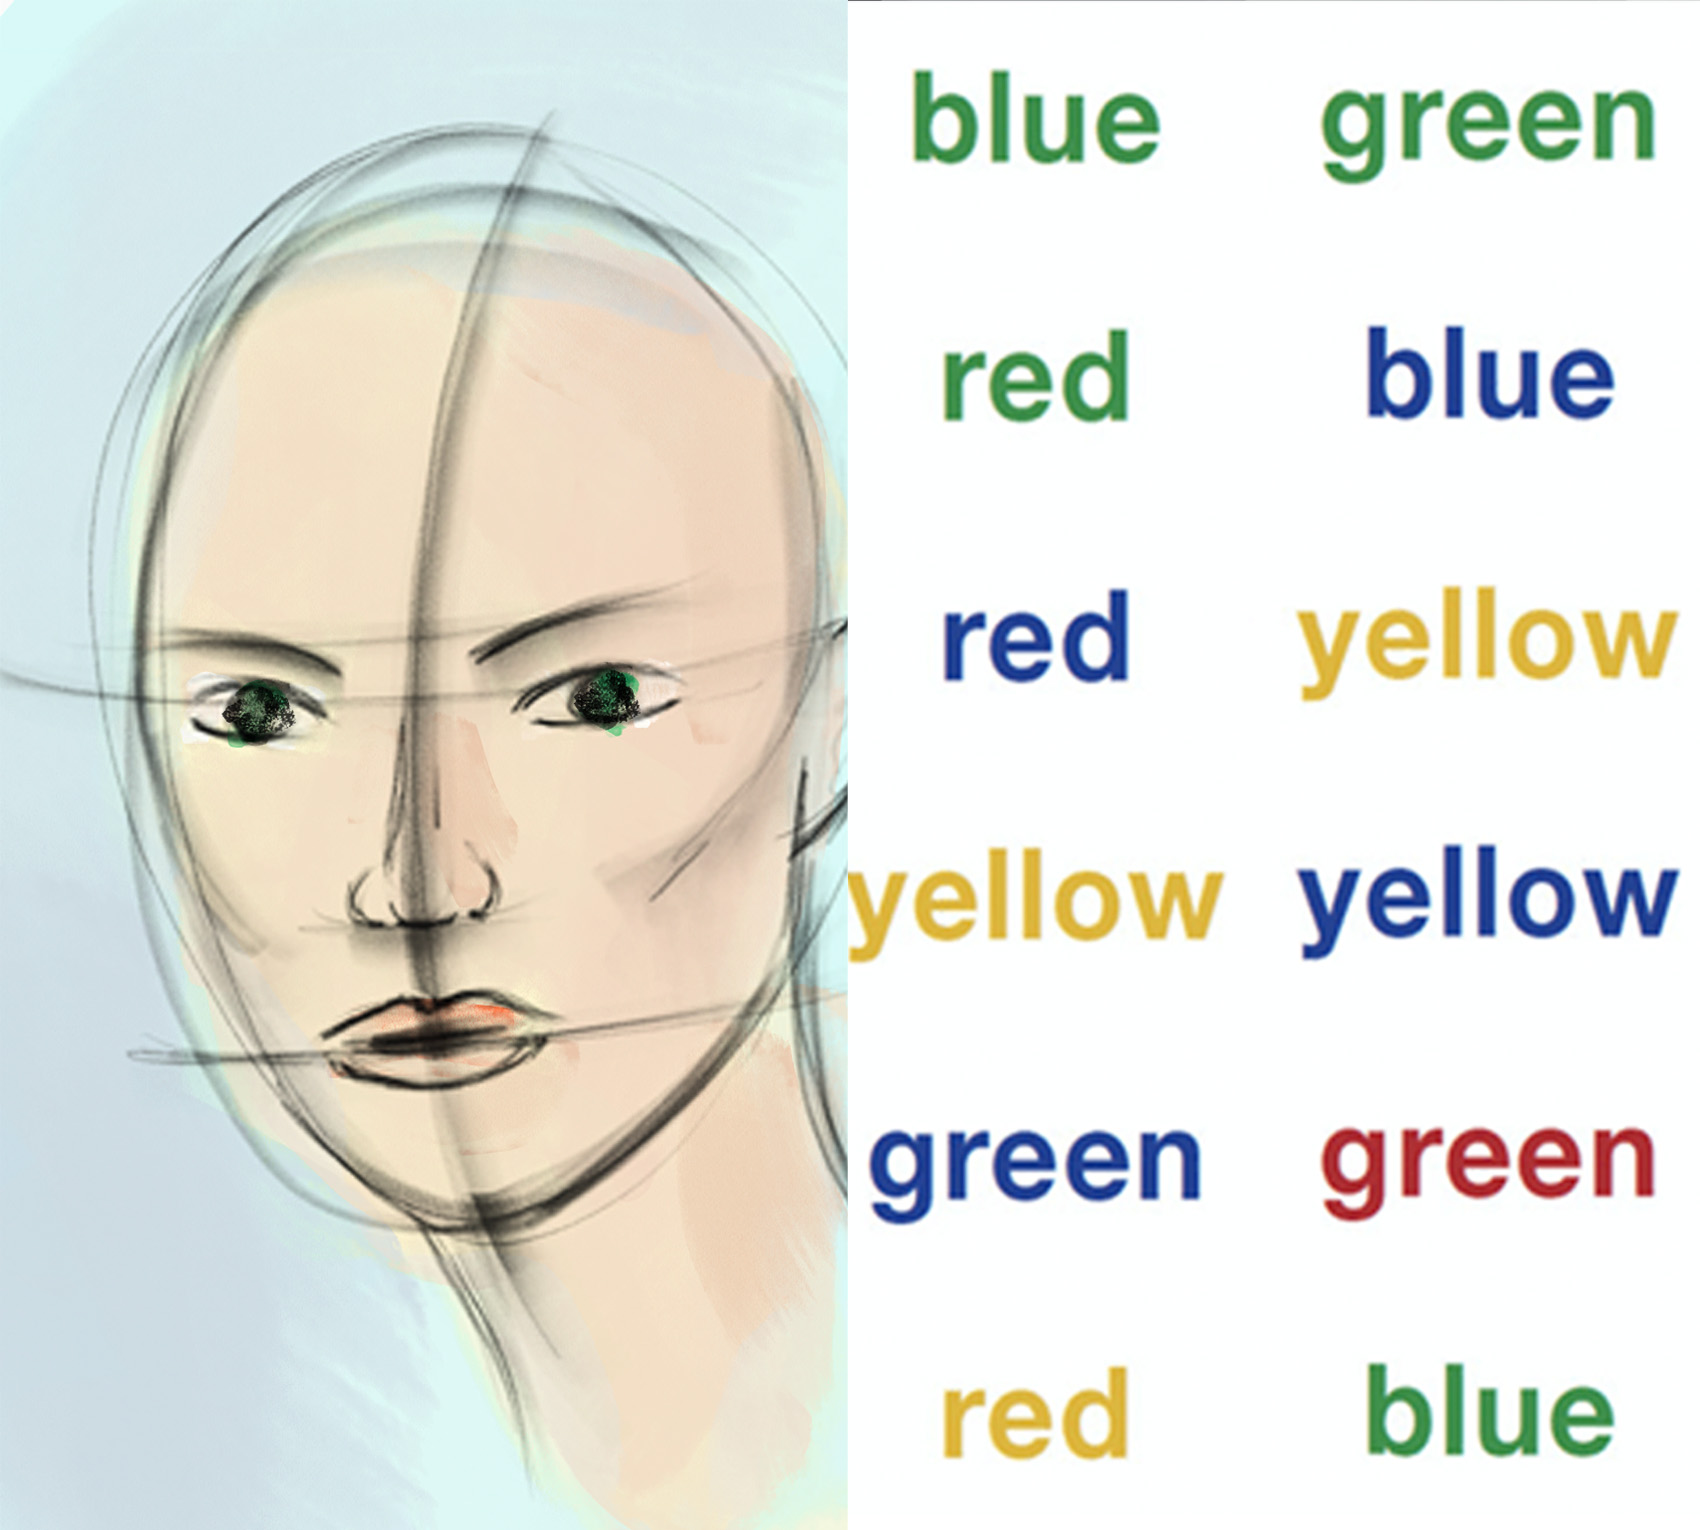 Composite image with a drawing of a face on the left and the names of colors on the right